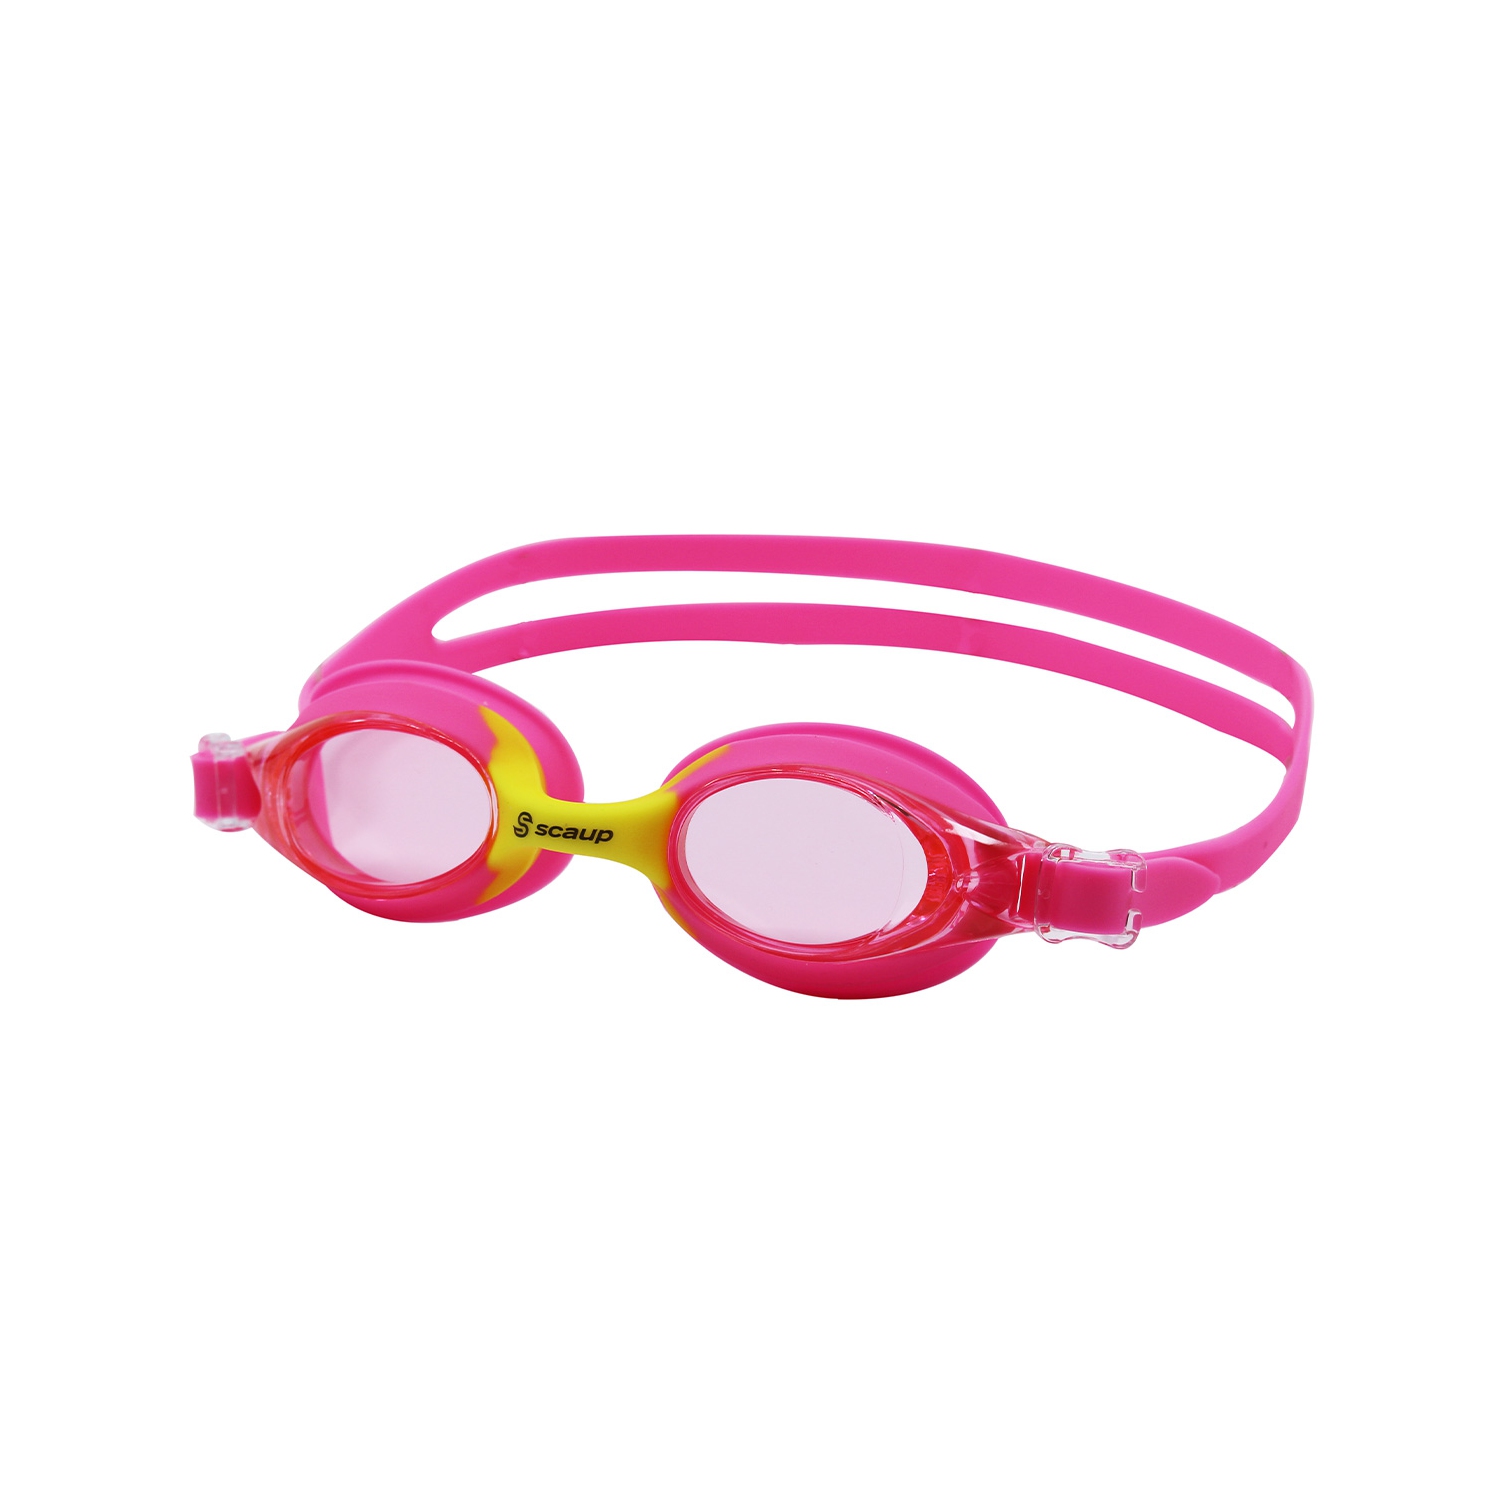 Scaup KAI Kids Swimming Goggles - Anti-Fog Recreational Swim Goggles with UV Protection, Pink